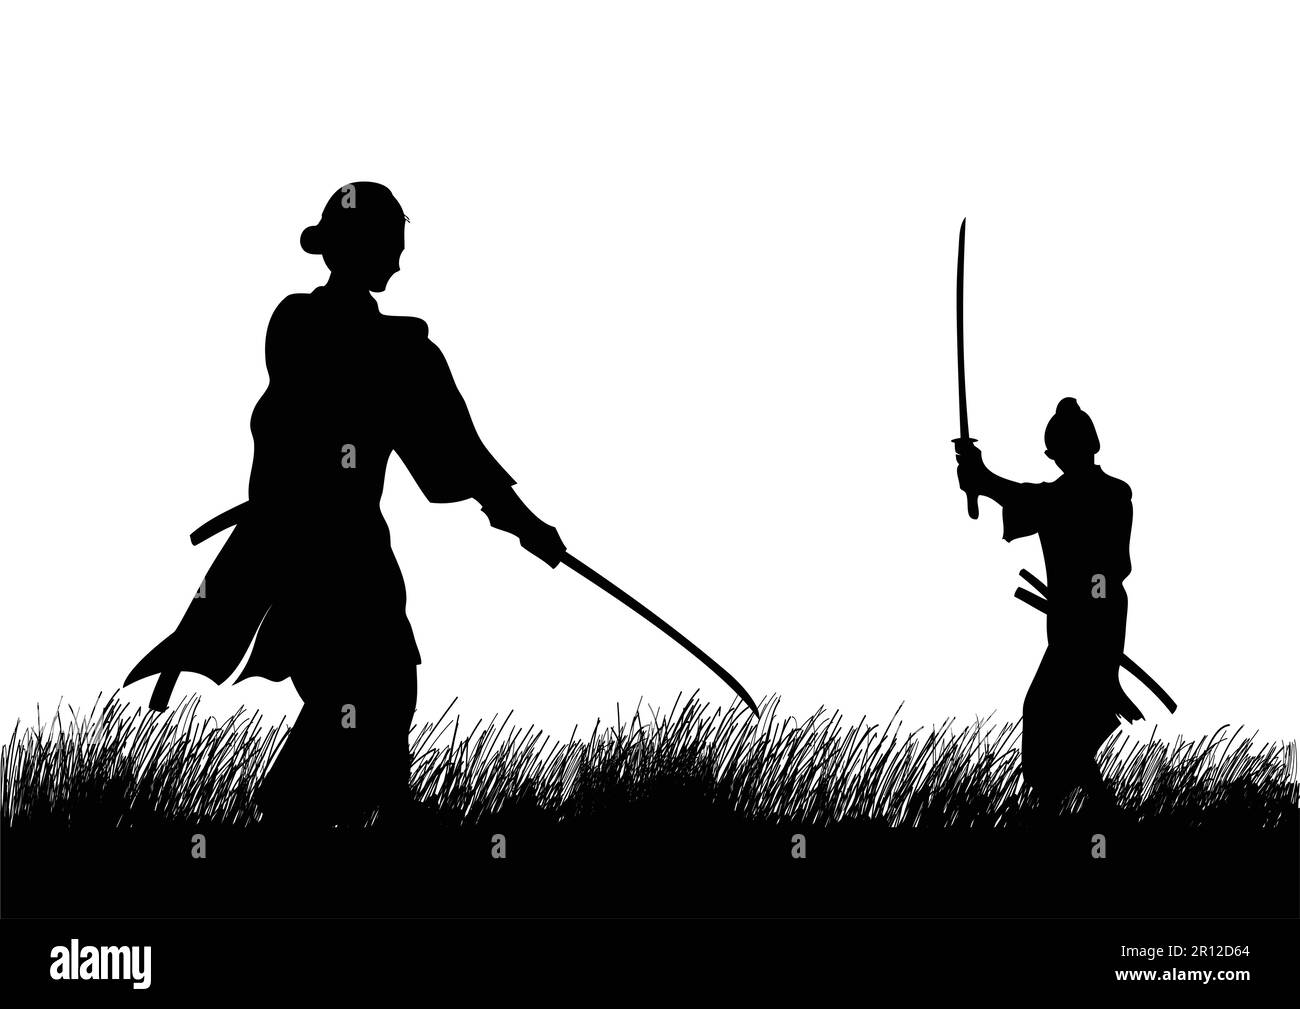 Two Samurai in duel stance facing each other on grass field Stock Vector